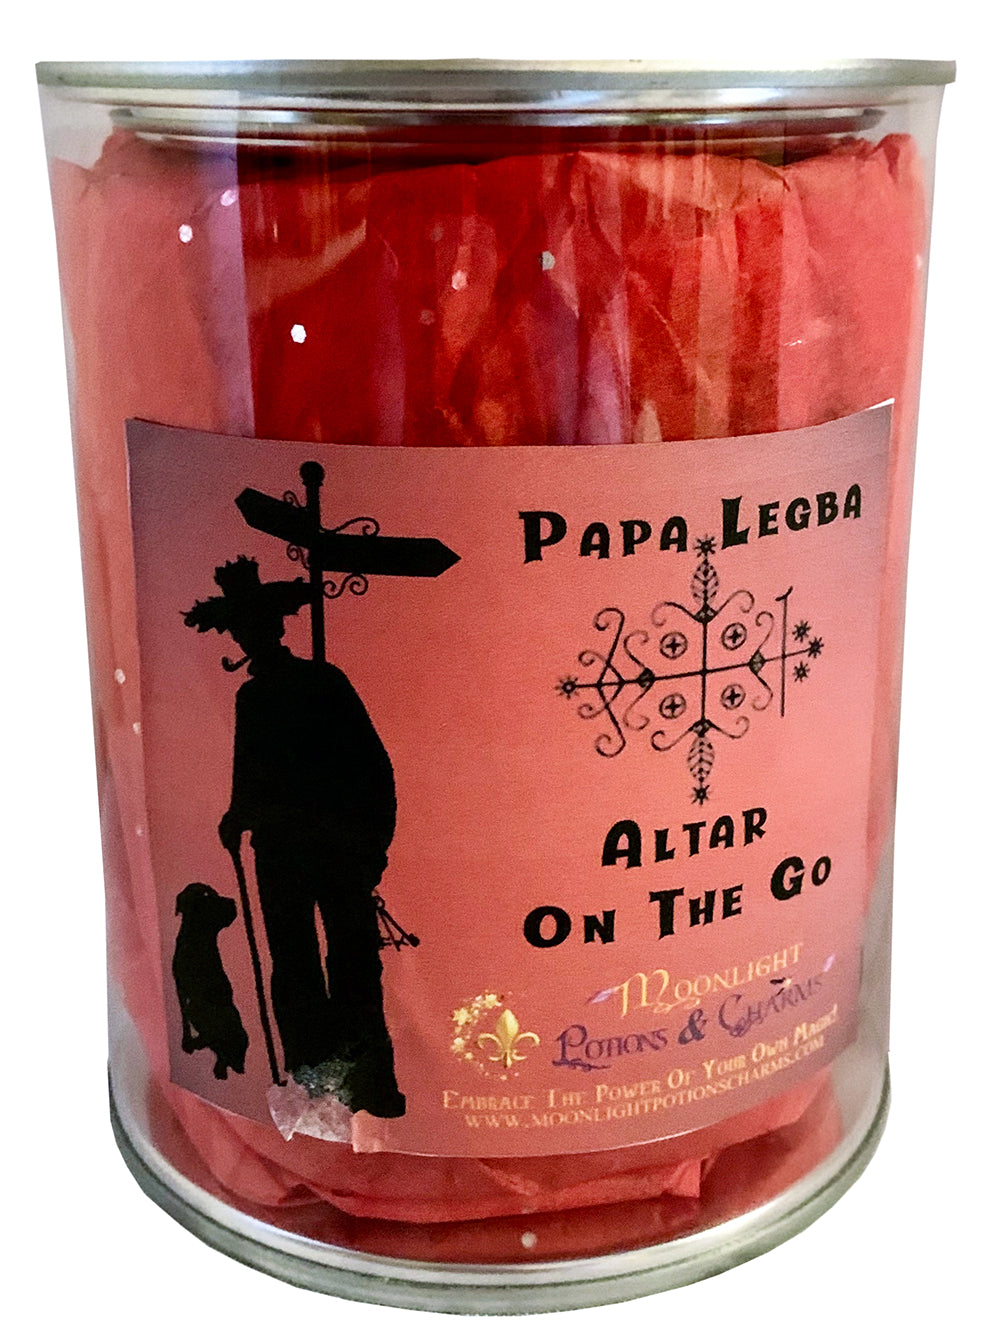 Papa Legba Altar On The Go, Pail - Moonlight Potions & Charms